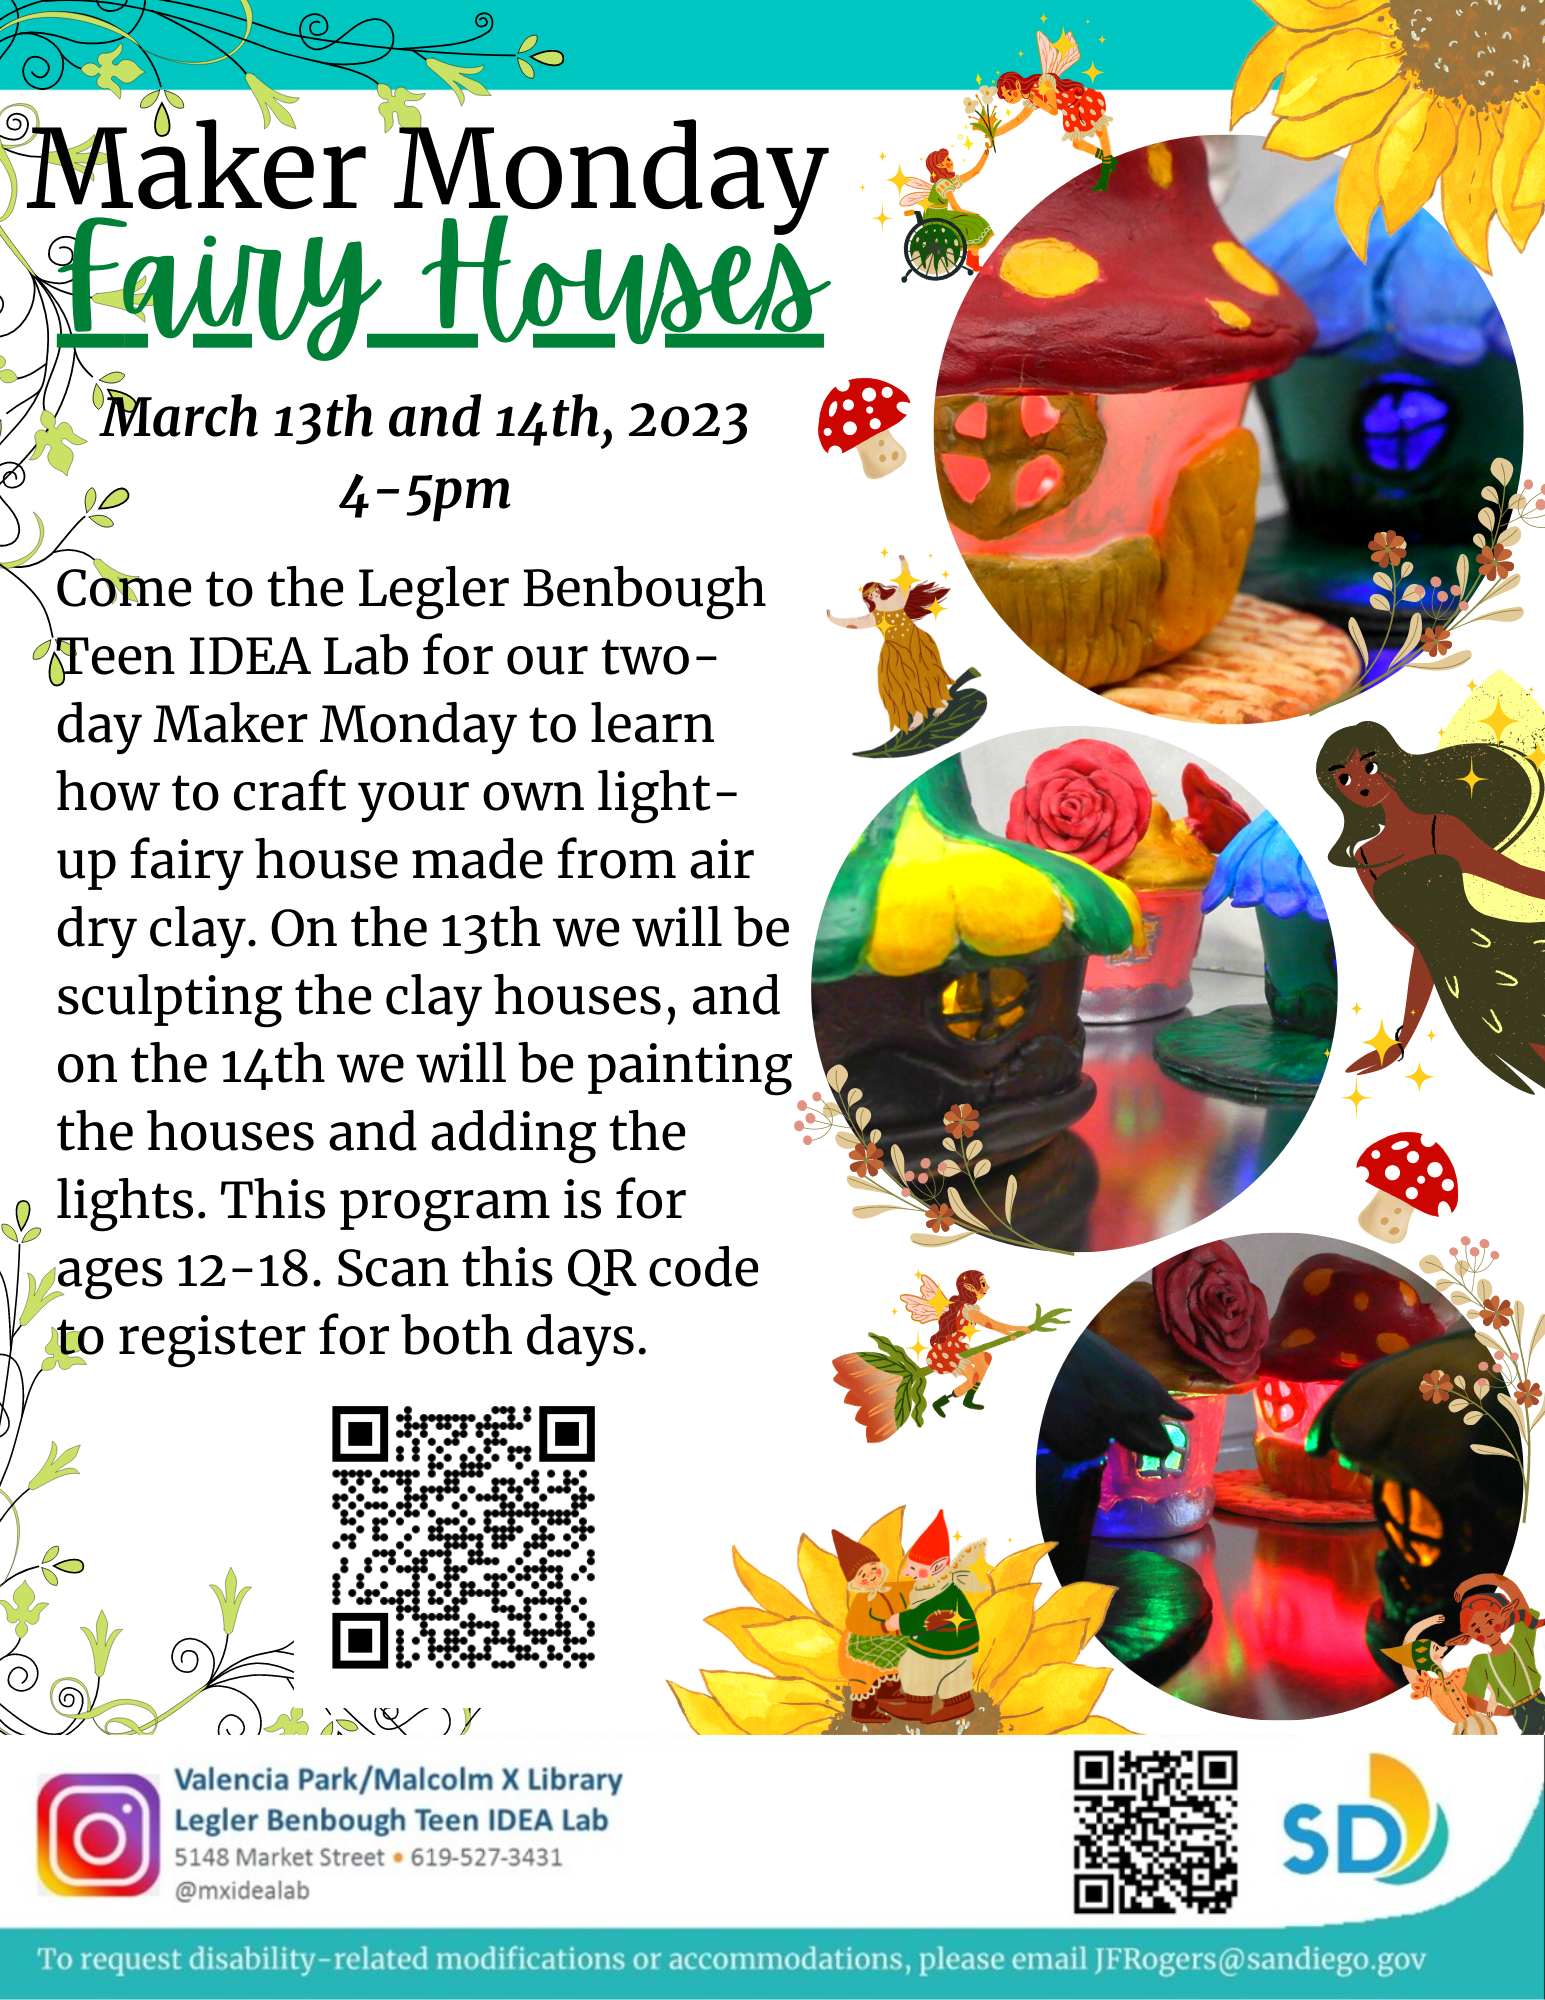 Maker Monday for March 13th and 14th featuring colorful fairy houses that light up.